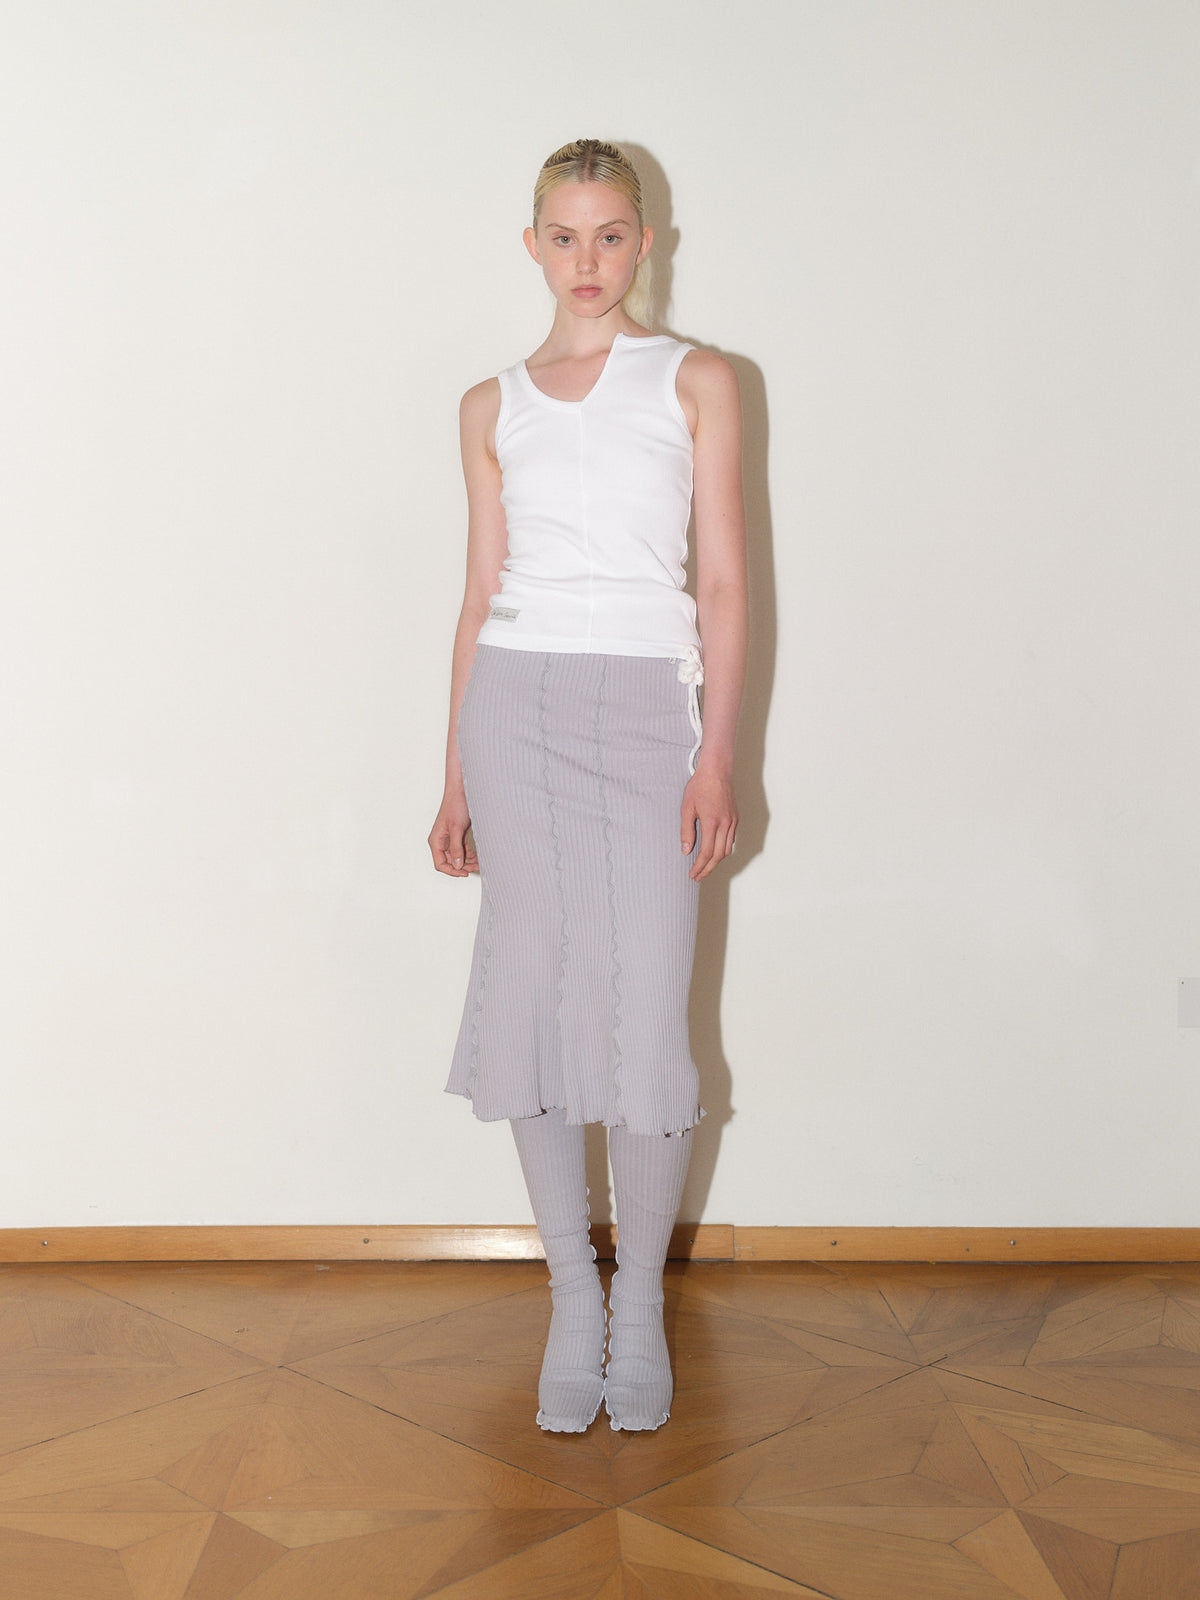 Cotton Jersey Tank Top designed by Christina Seewald. Sustainable, designed and made in Europe.